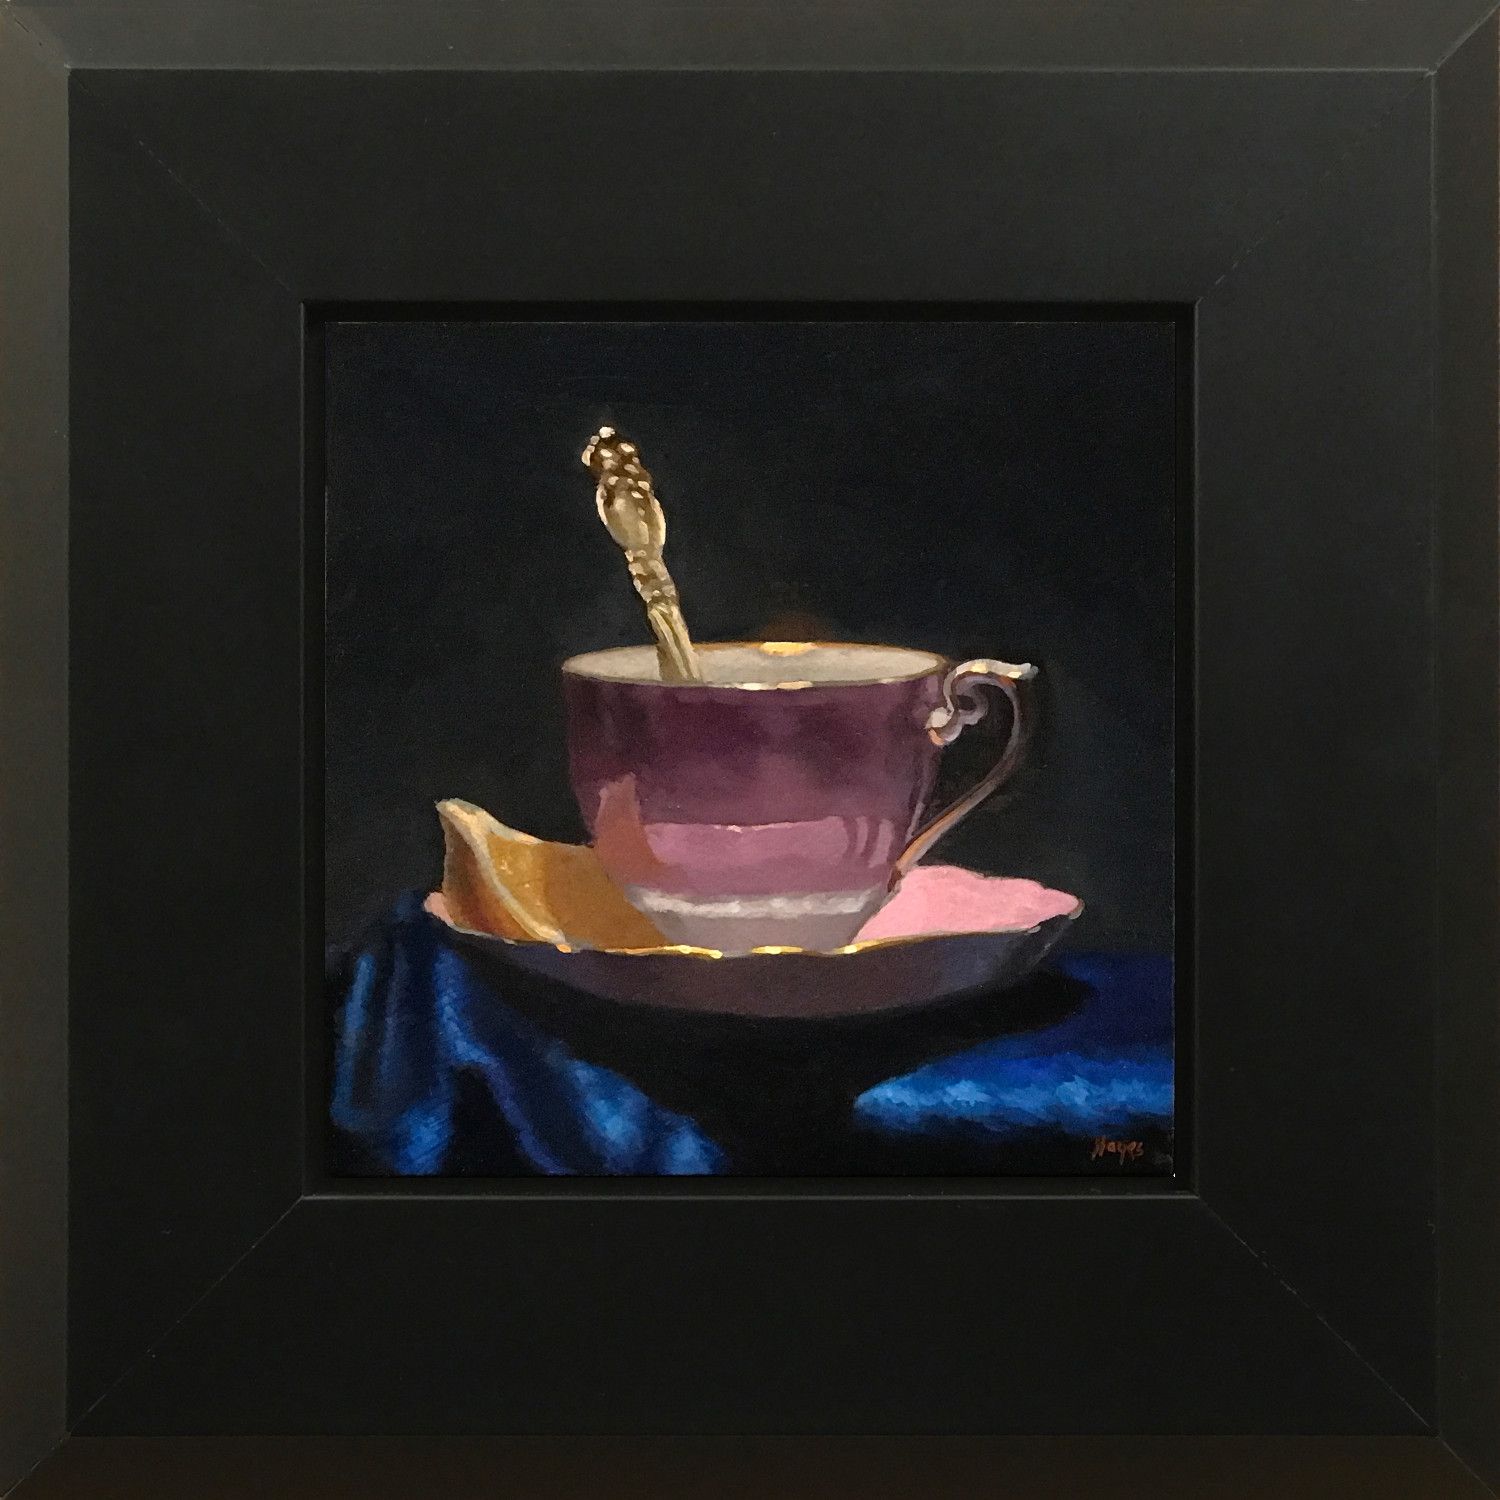 Pink Teacup and Blue Cloth$695